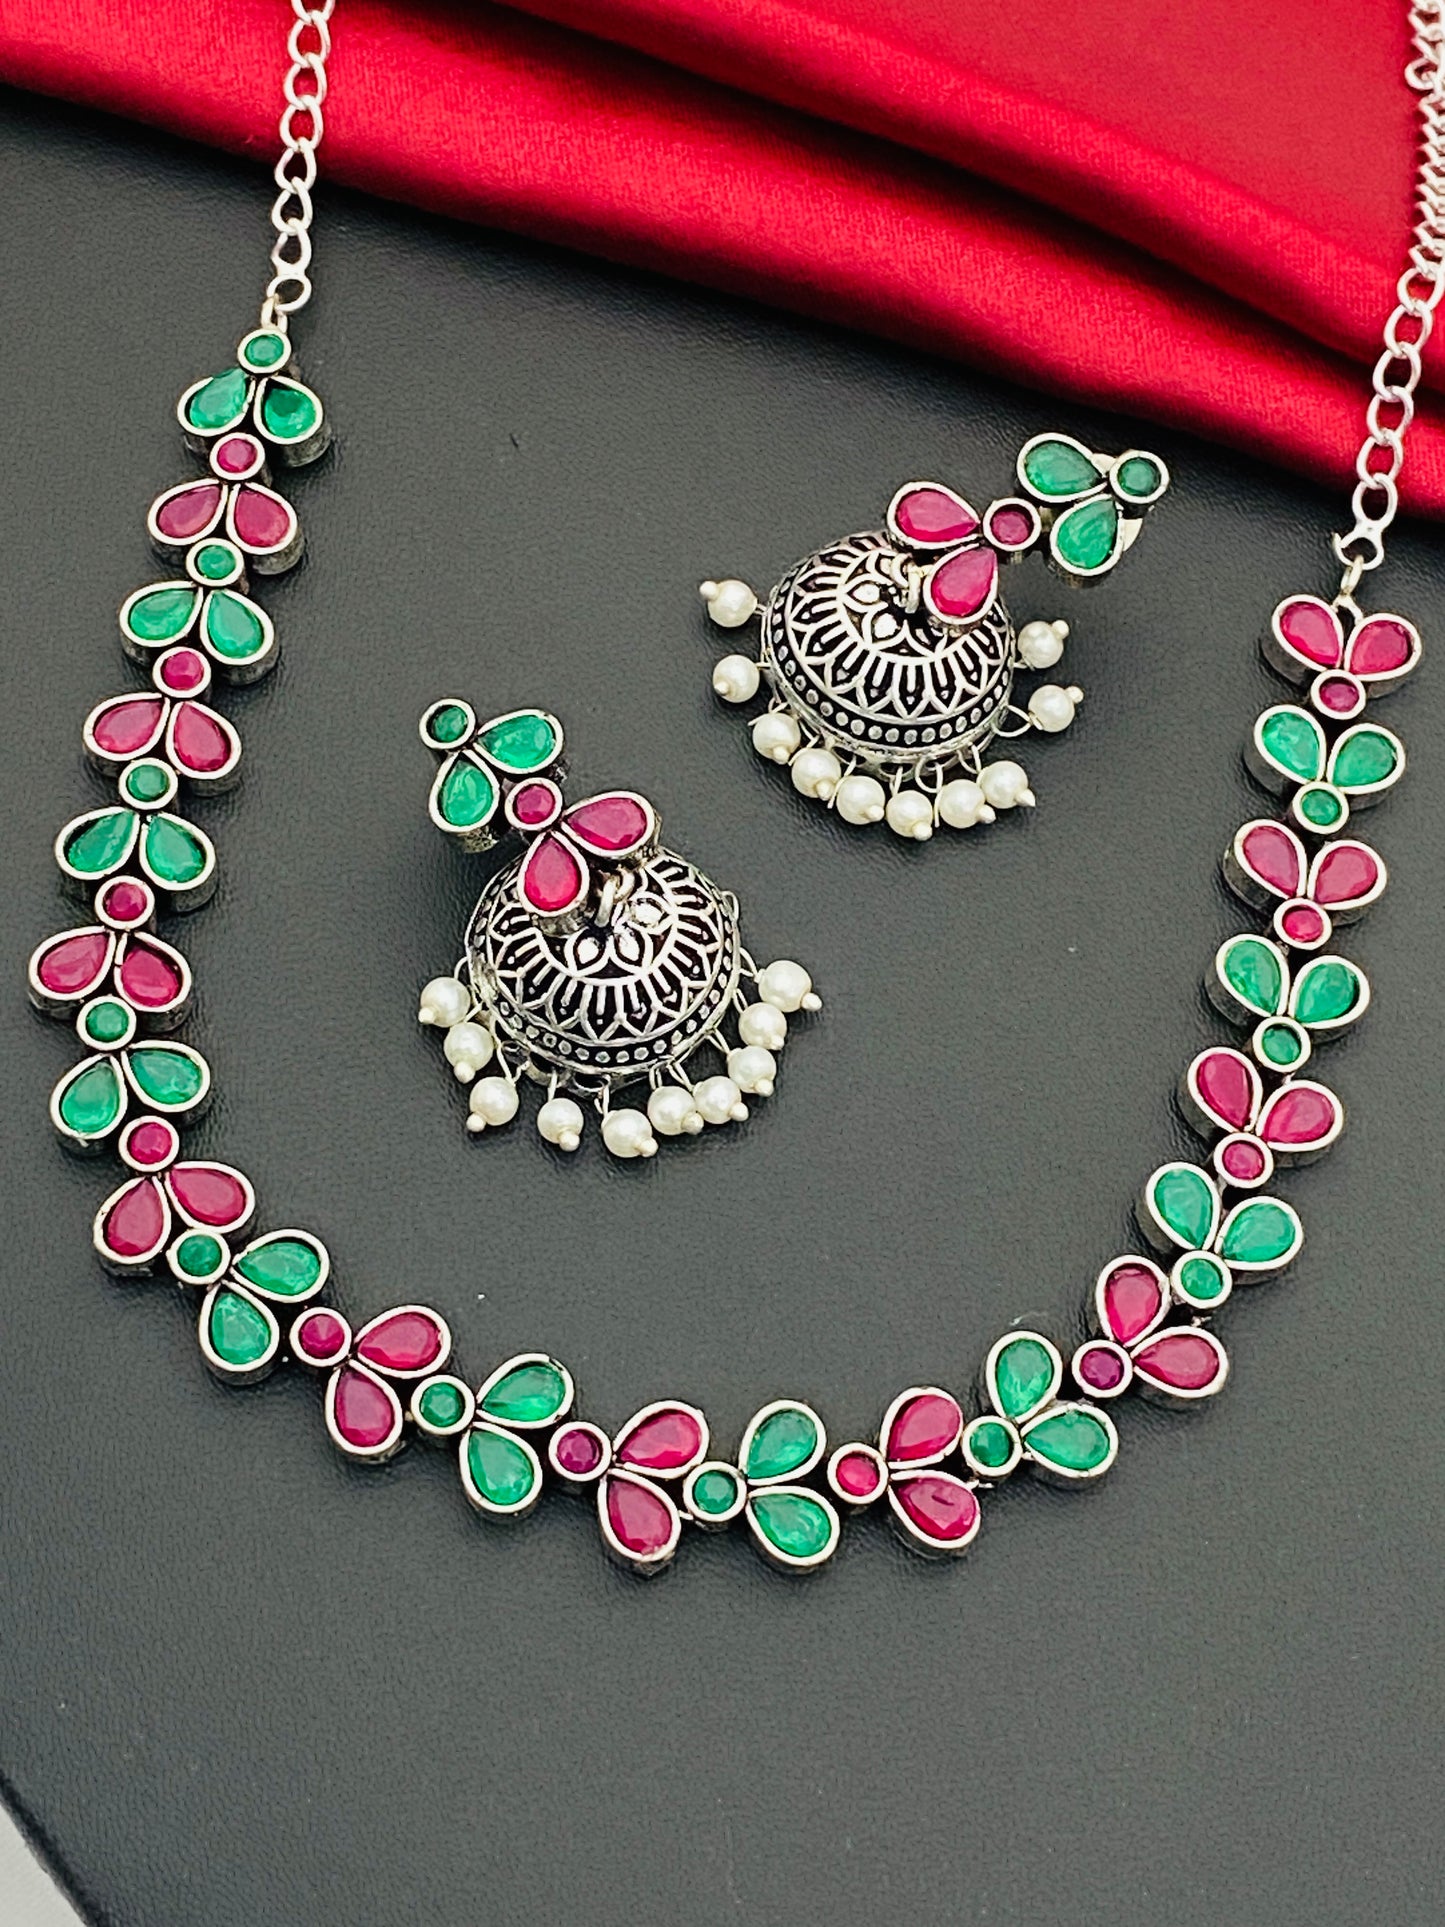 Silver Oxidized Necklace With Jhumka Earrings In USA